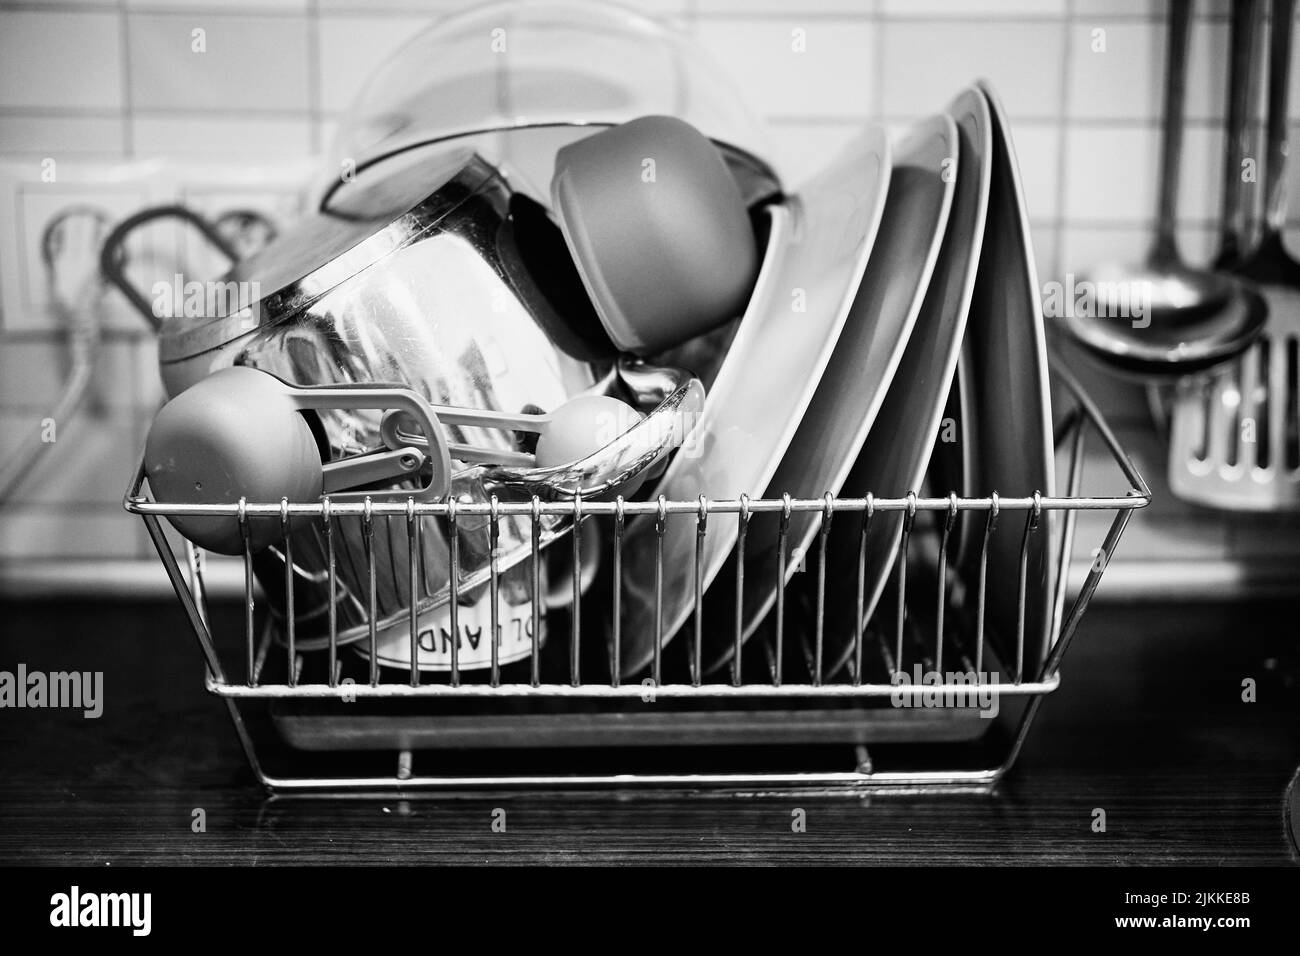 A grayscale of dishes in a metal basket Stock Photo